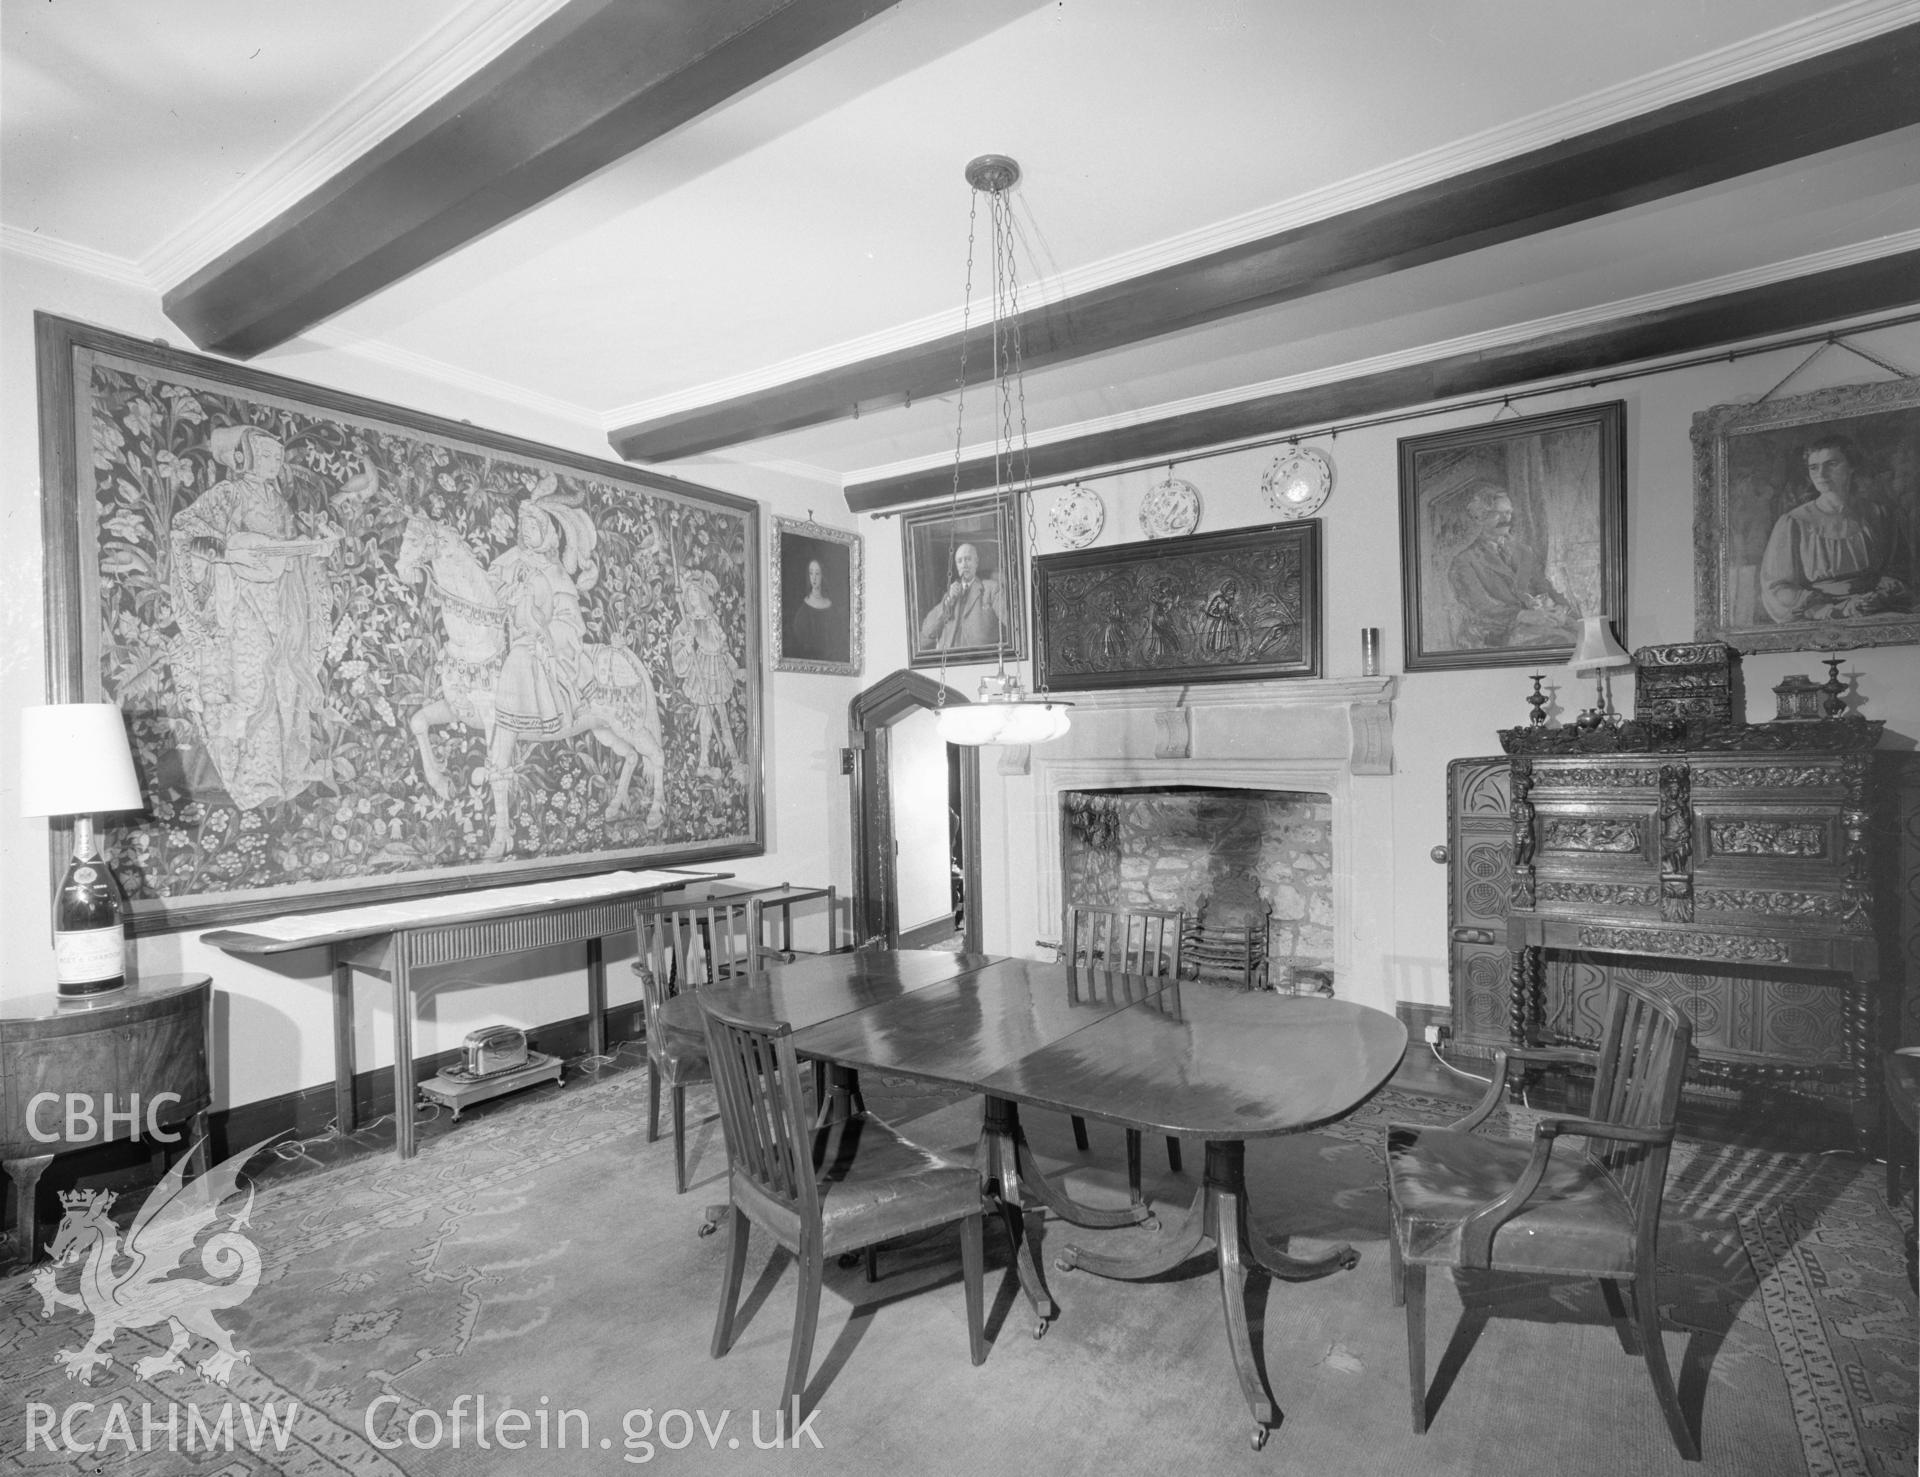 Black and white acetate negative showing an interior view of Nottage Court.